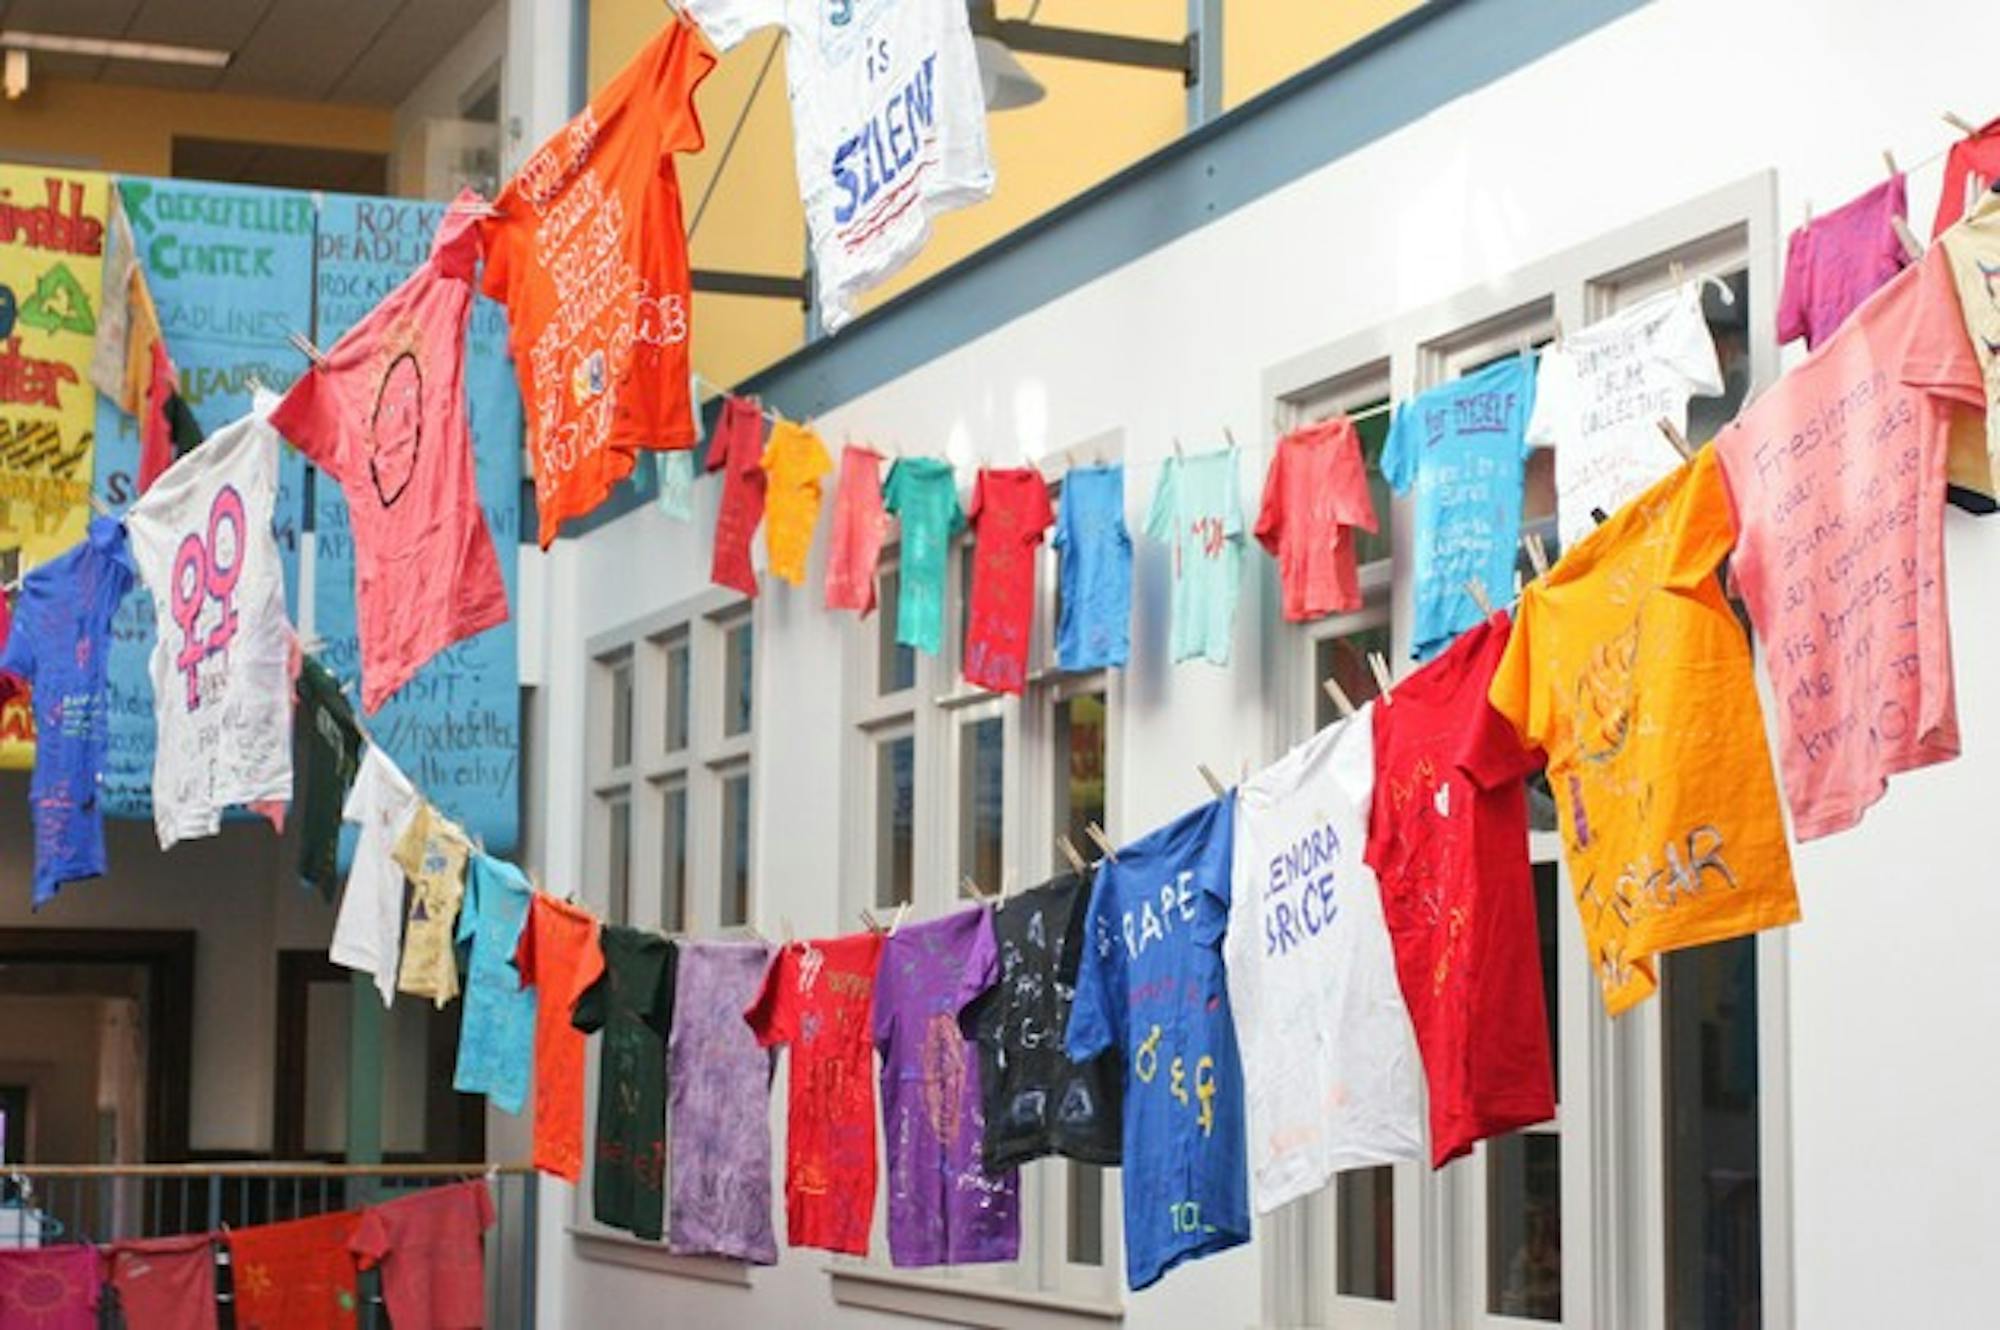 The Clothesline Project in the Collis Center displays tee-shirts students made to speak about their experiences with sexual assault.